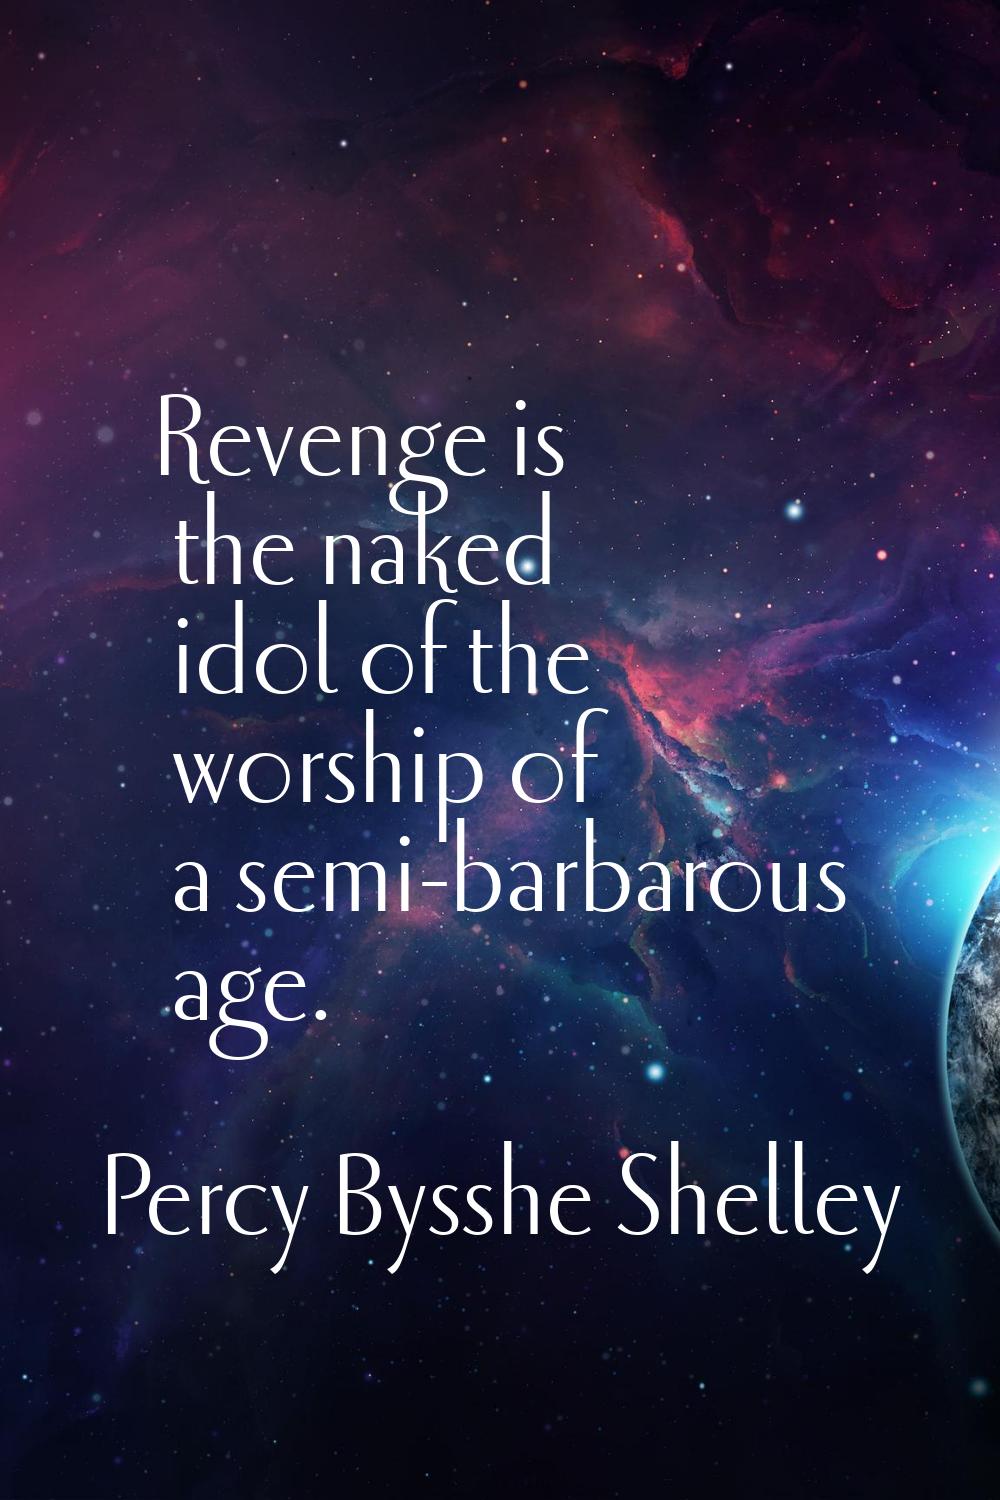 Revenge is the naked idol of the worship of a semi-barbarous age.